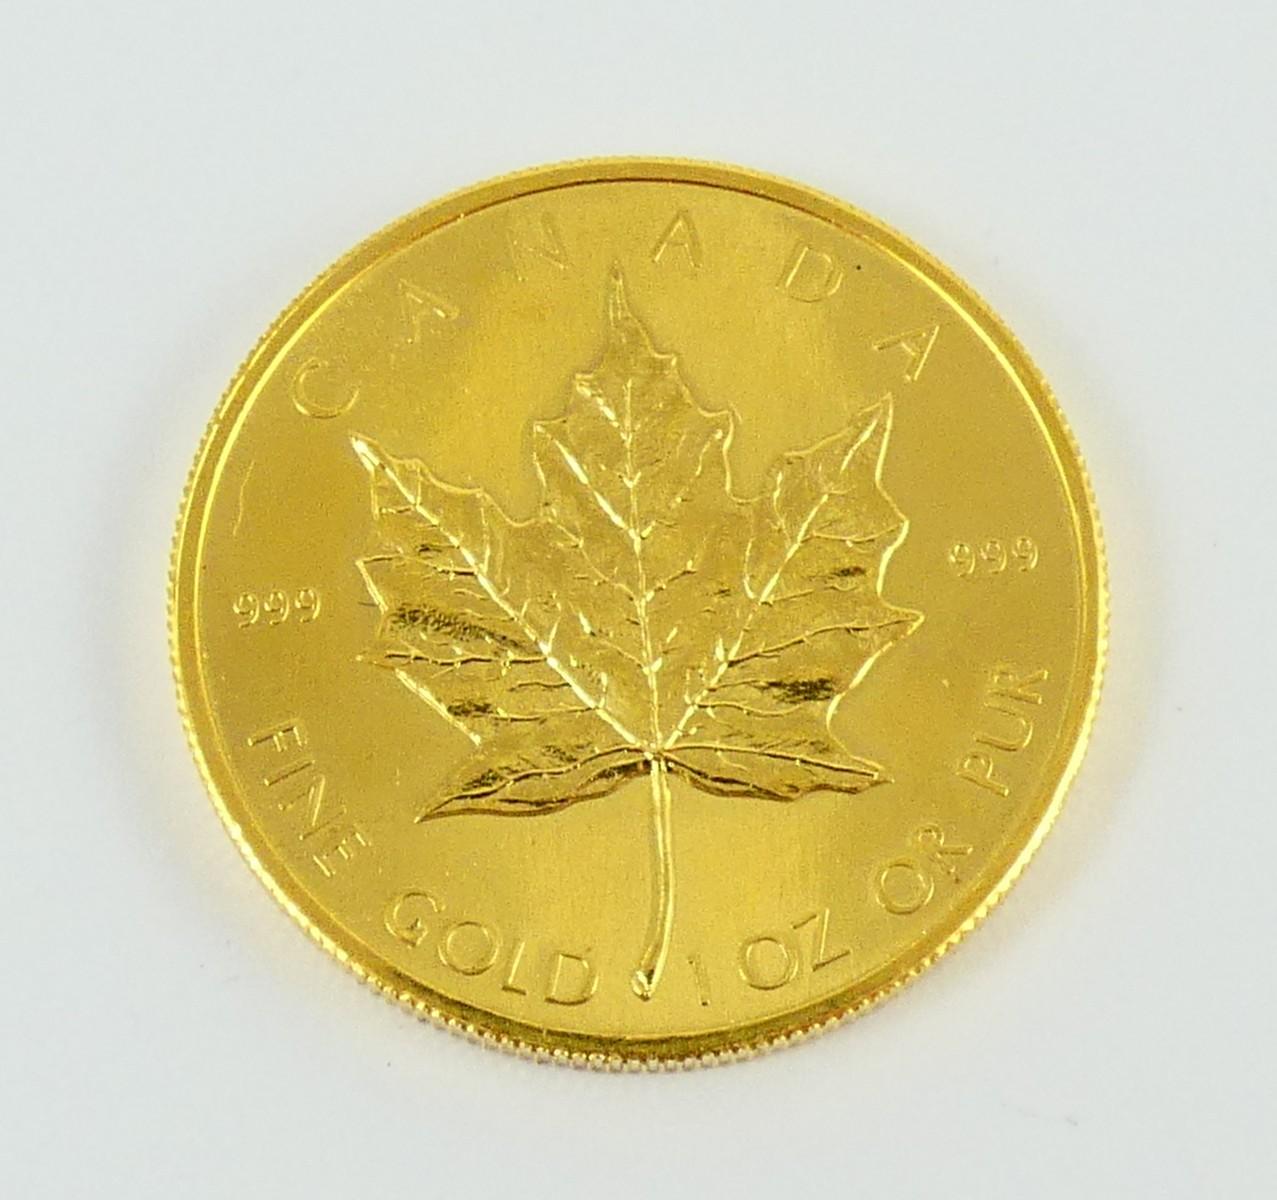 CANADIAN GOLD COIN - no tax